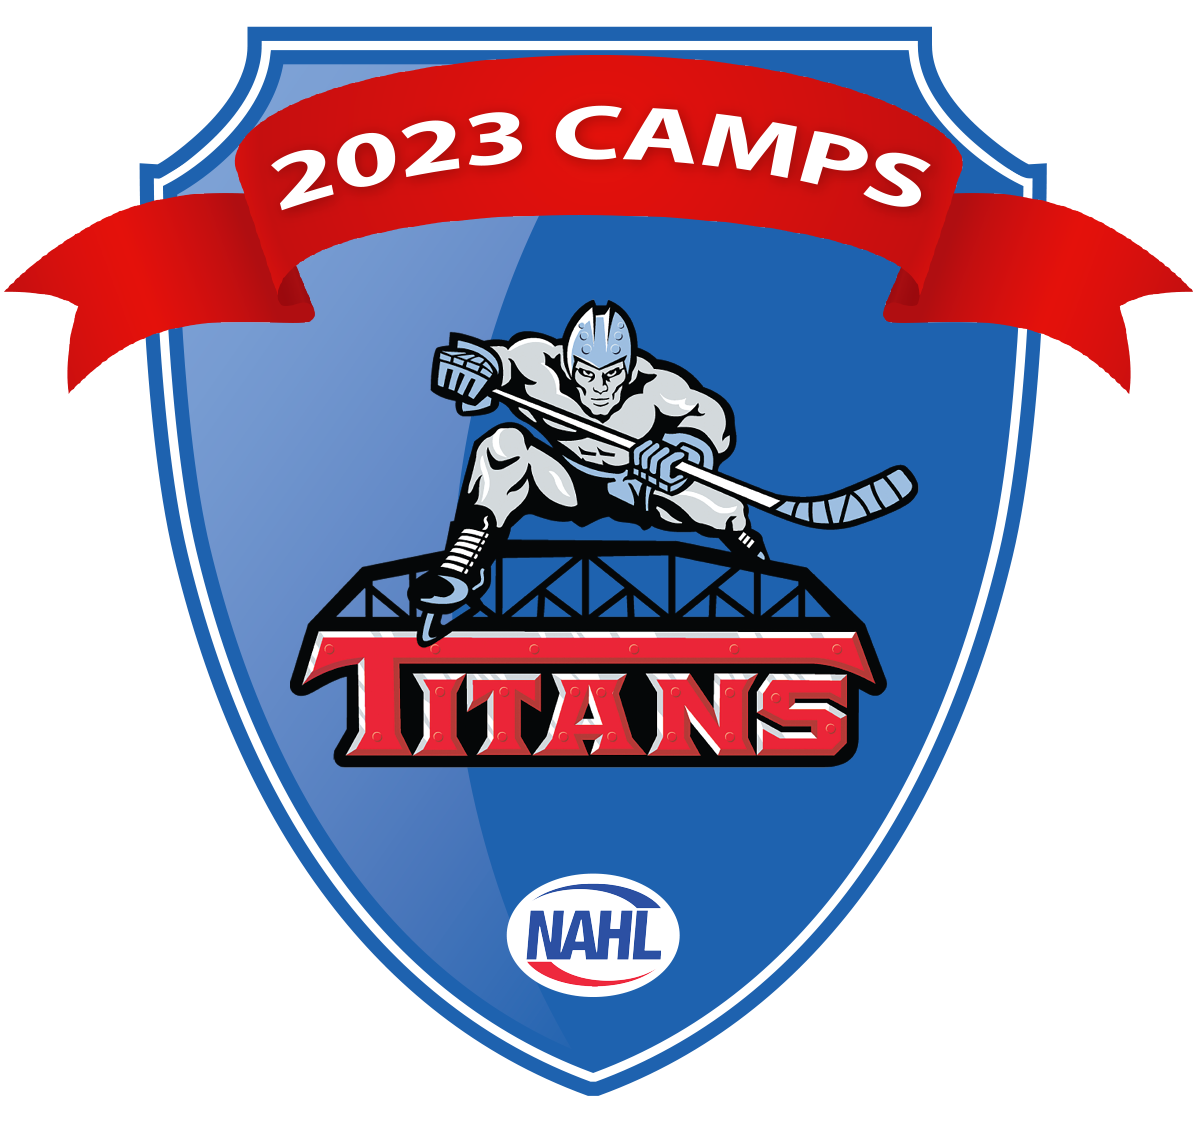 N.J. Titans at home this weekend for two semi-final games